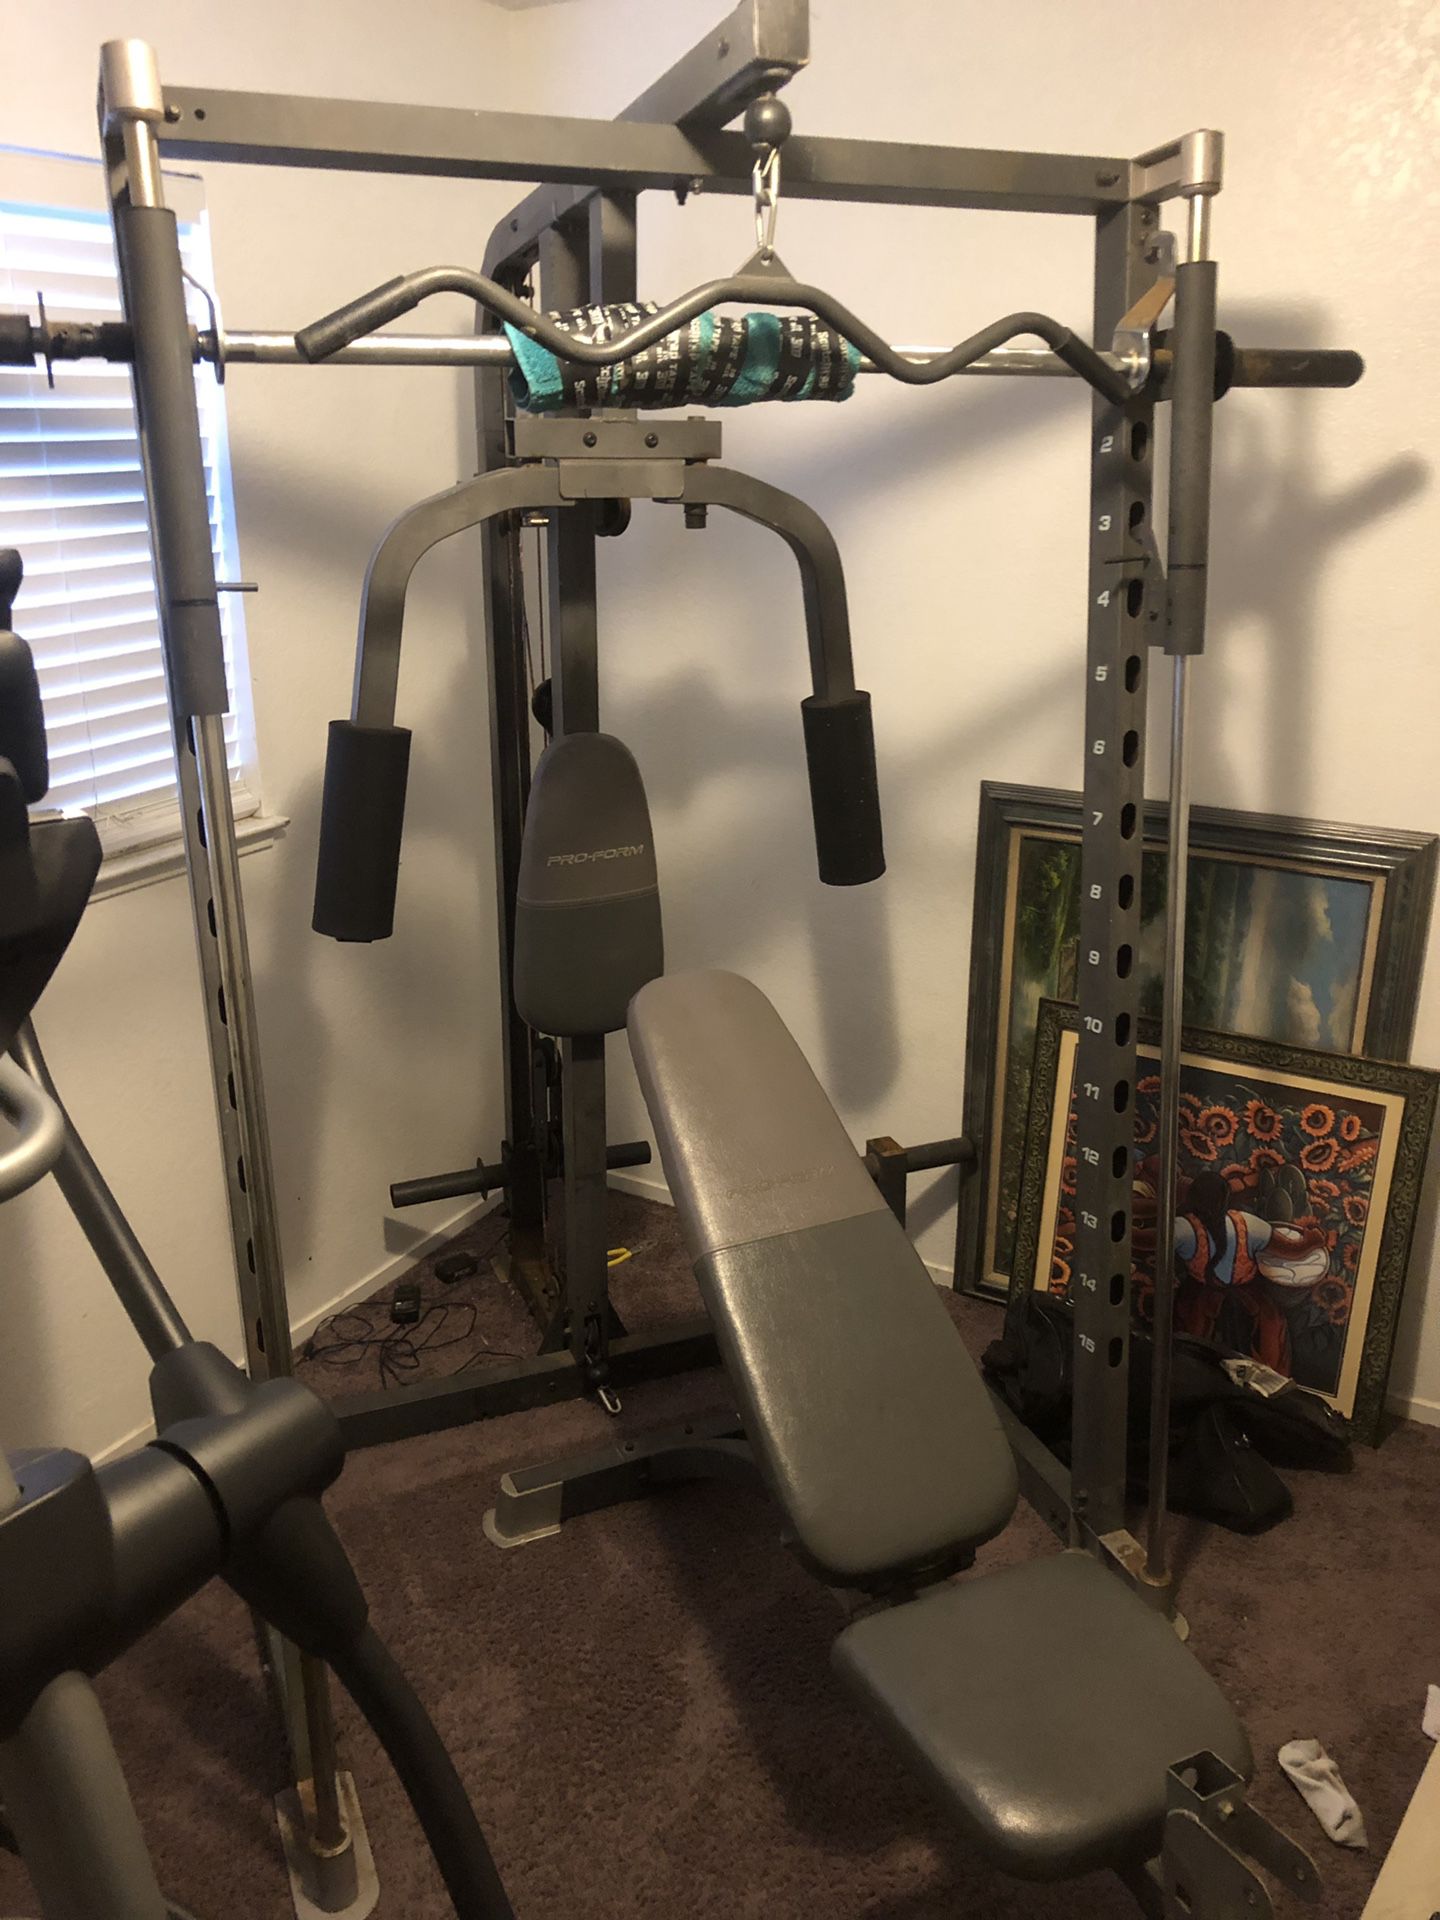 Smith Machine workout equipment and weights 35&50lb dumbbells sold.